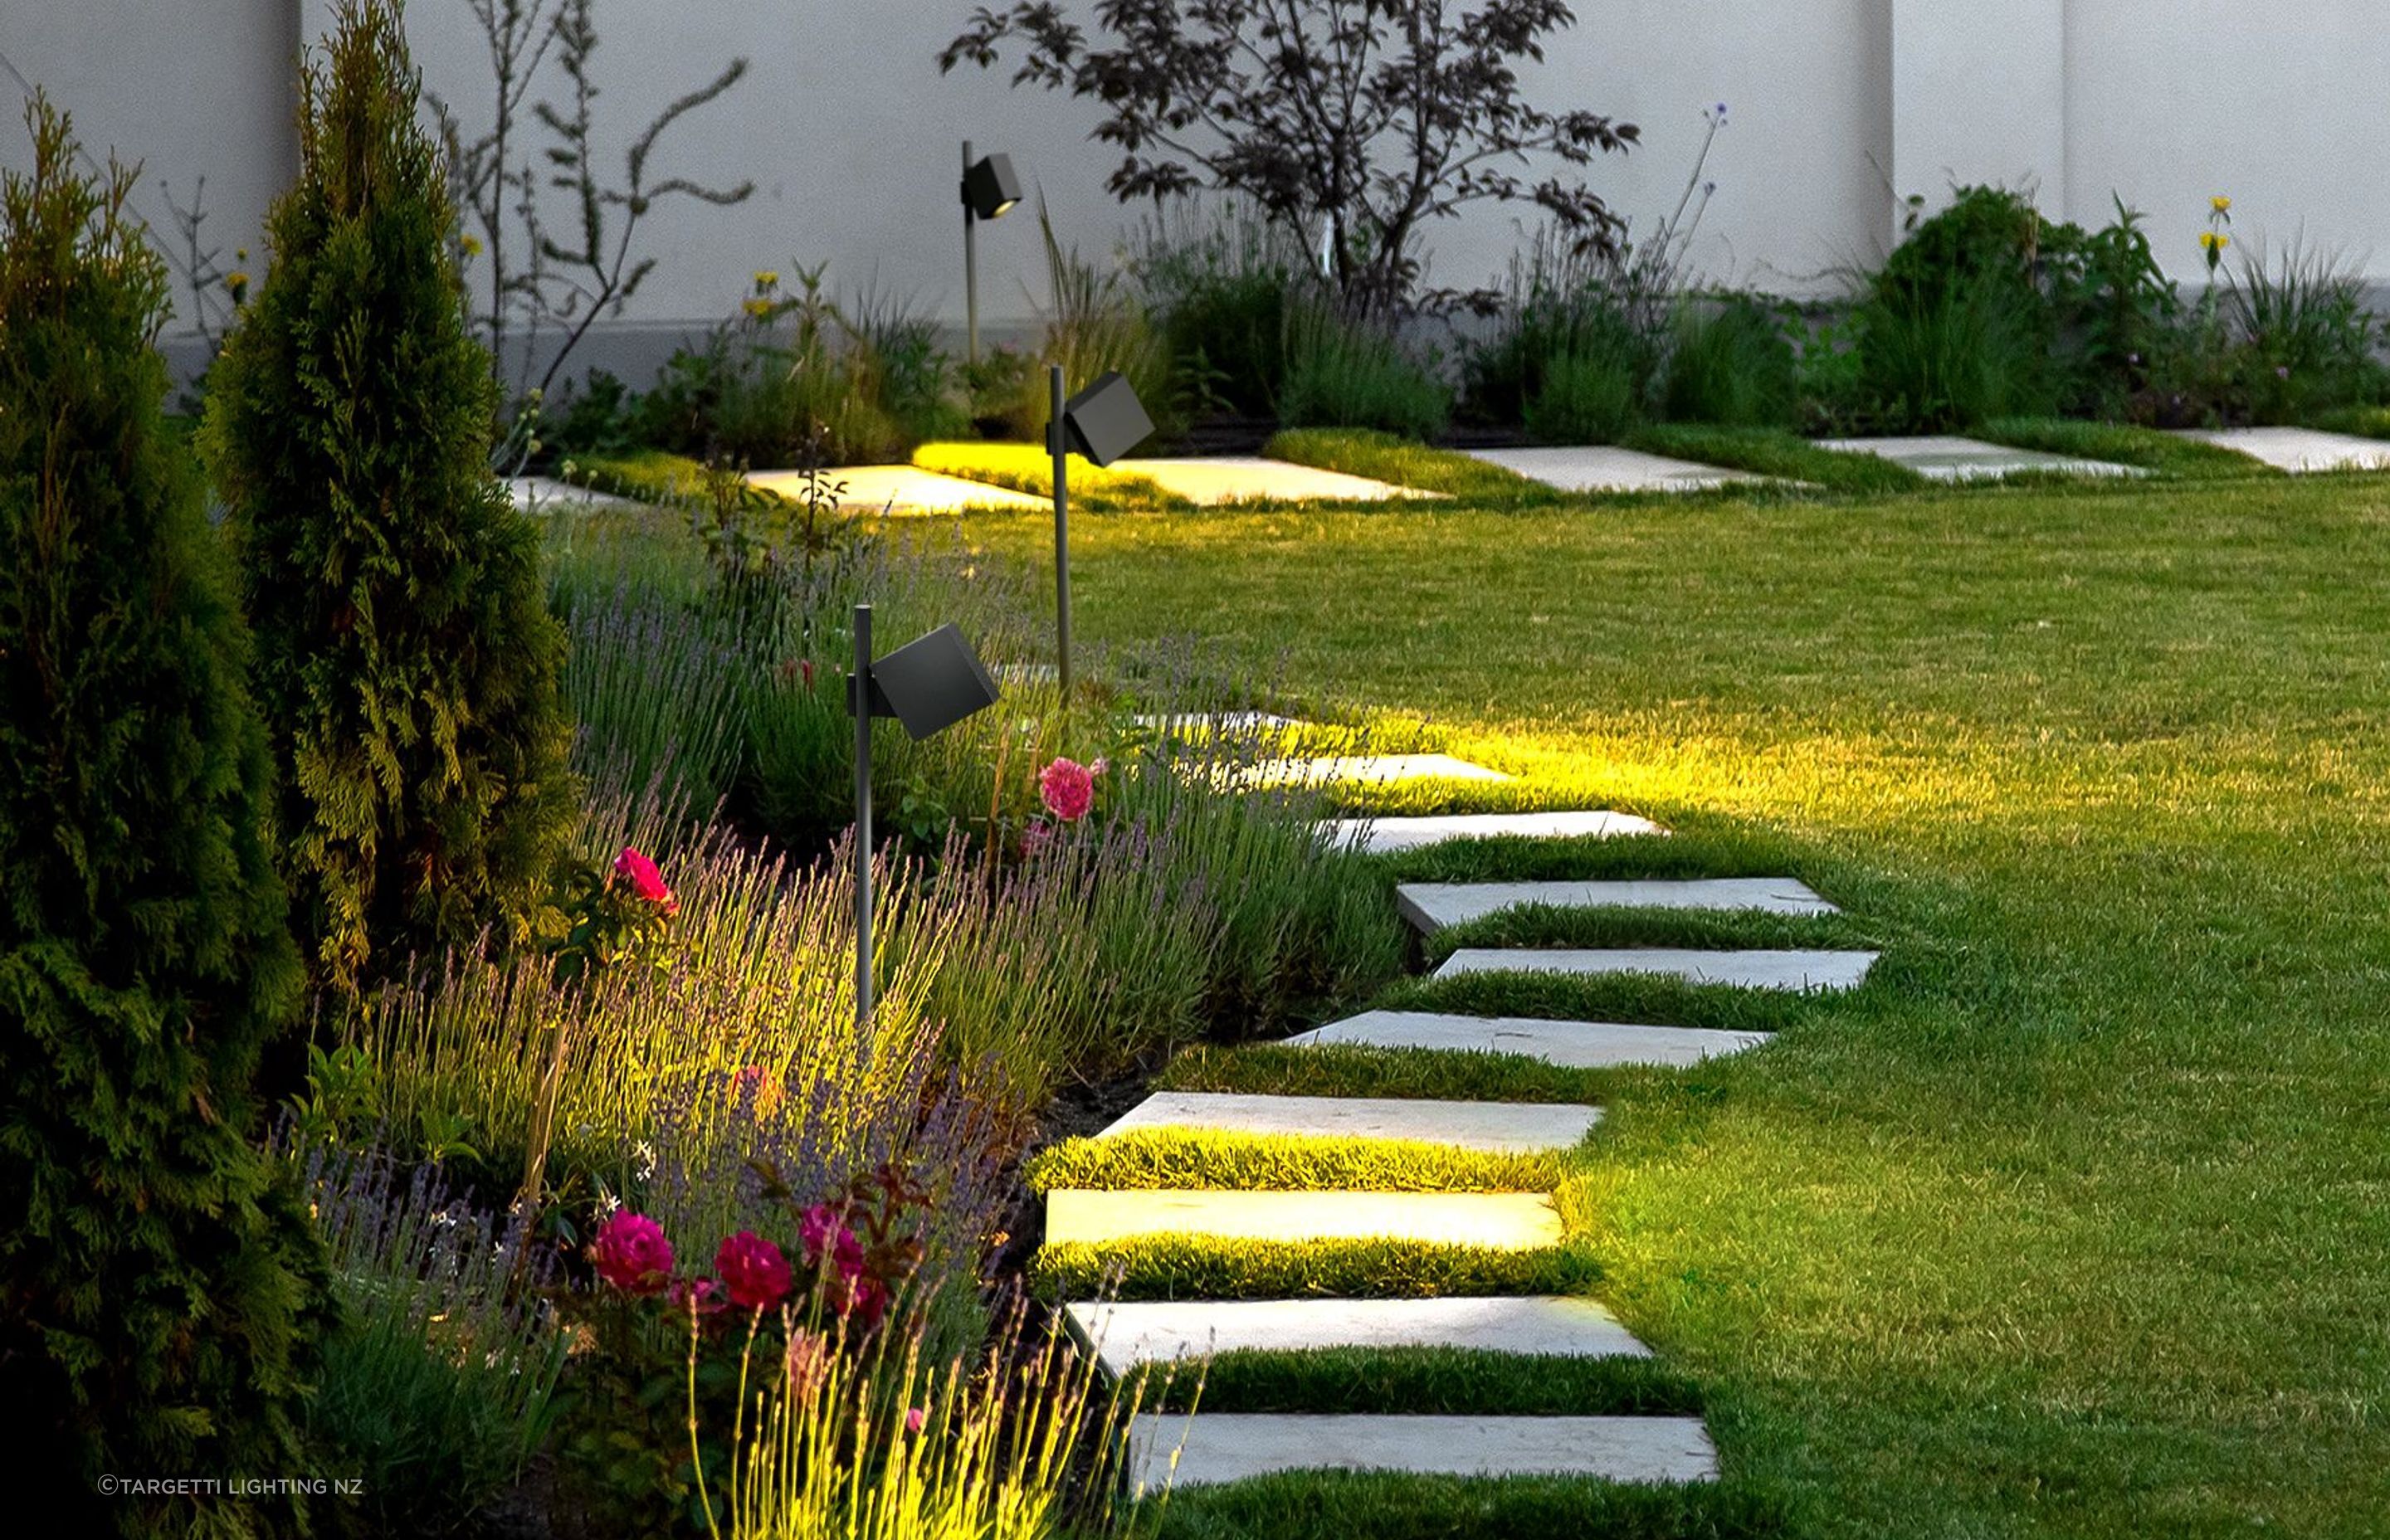 The beautifully designed Applique Bollard will stylishly light up any outdoor space